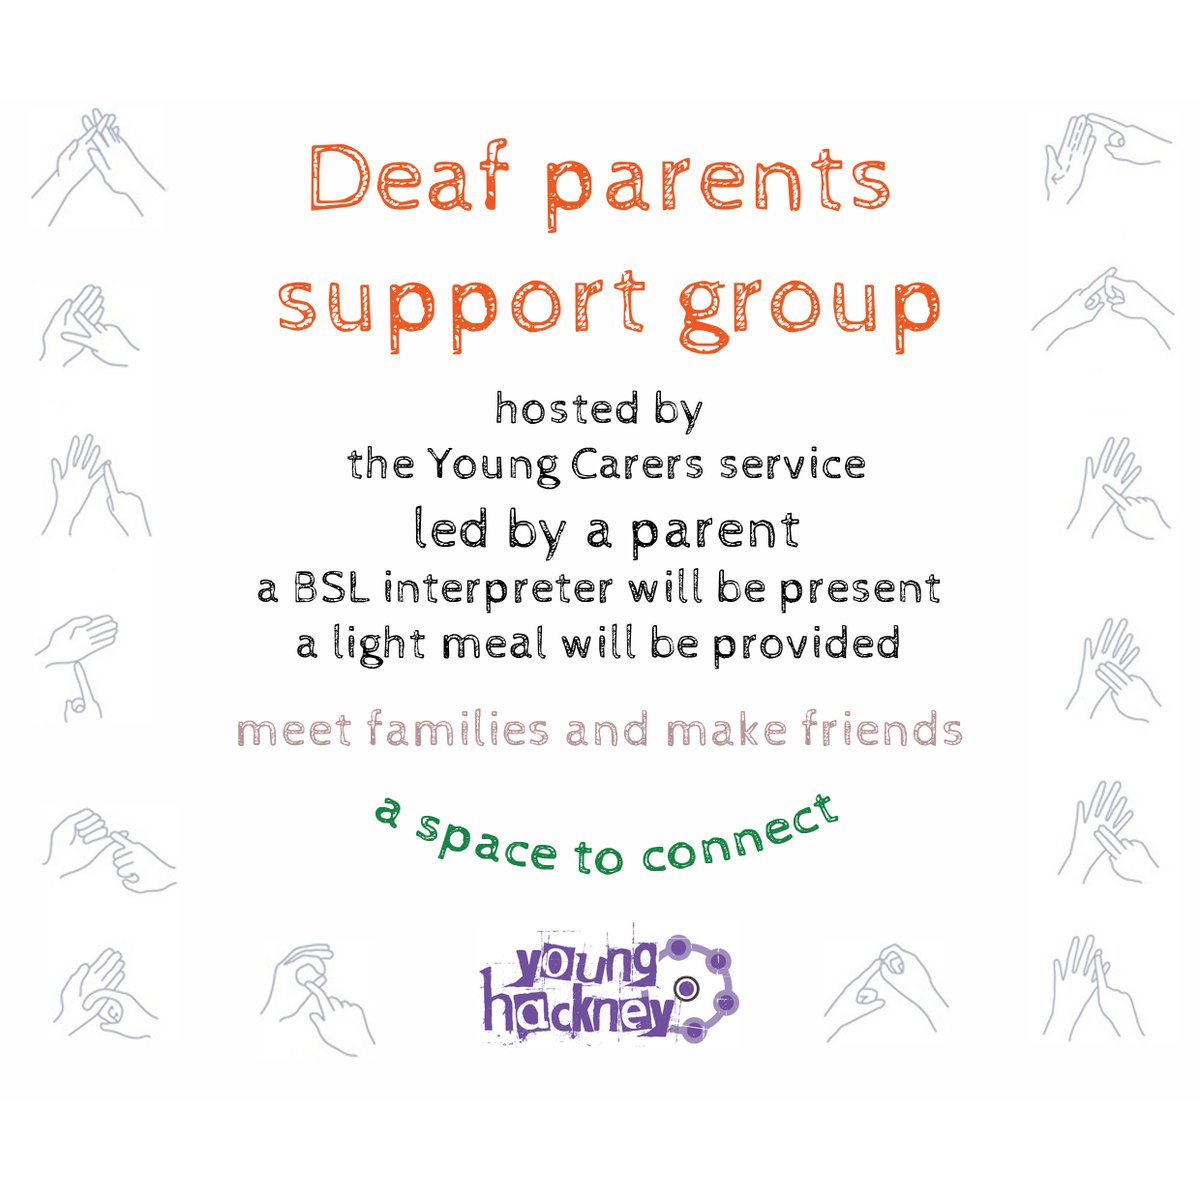 Join the Young Carers team on Wednesday evenings (20 March, 17 April, 15 May, 12 June and 10 July) from 6pm to 8pm at Forest Road Youth Hub for the Deaf Parents Support Group! Email yh.youngcarers@hackney.gov.uk for more information and to reserve your space!